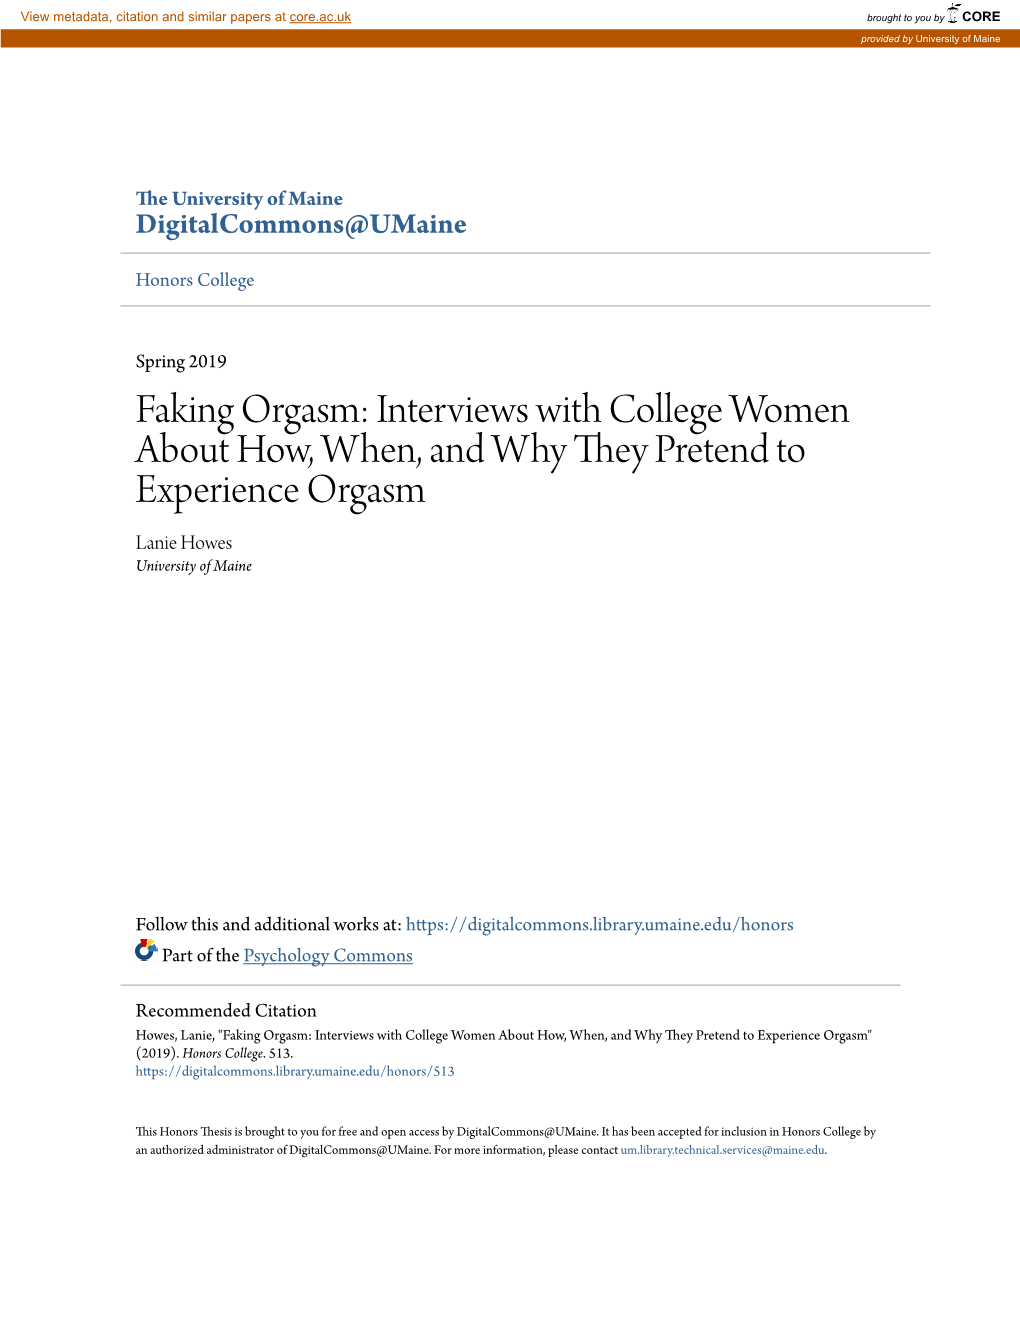 Faking Orgasm: Interviews with College Women About How, When, and Why They Pretend to Experience Orgasm Lanie Howes University of Maine